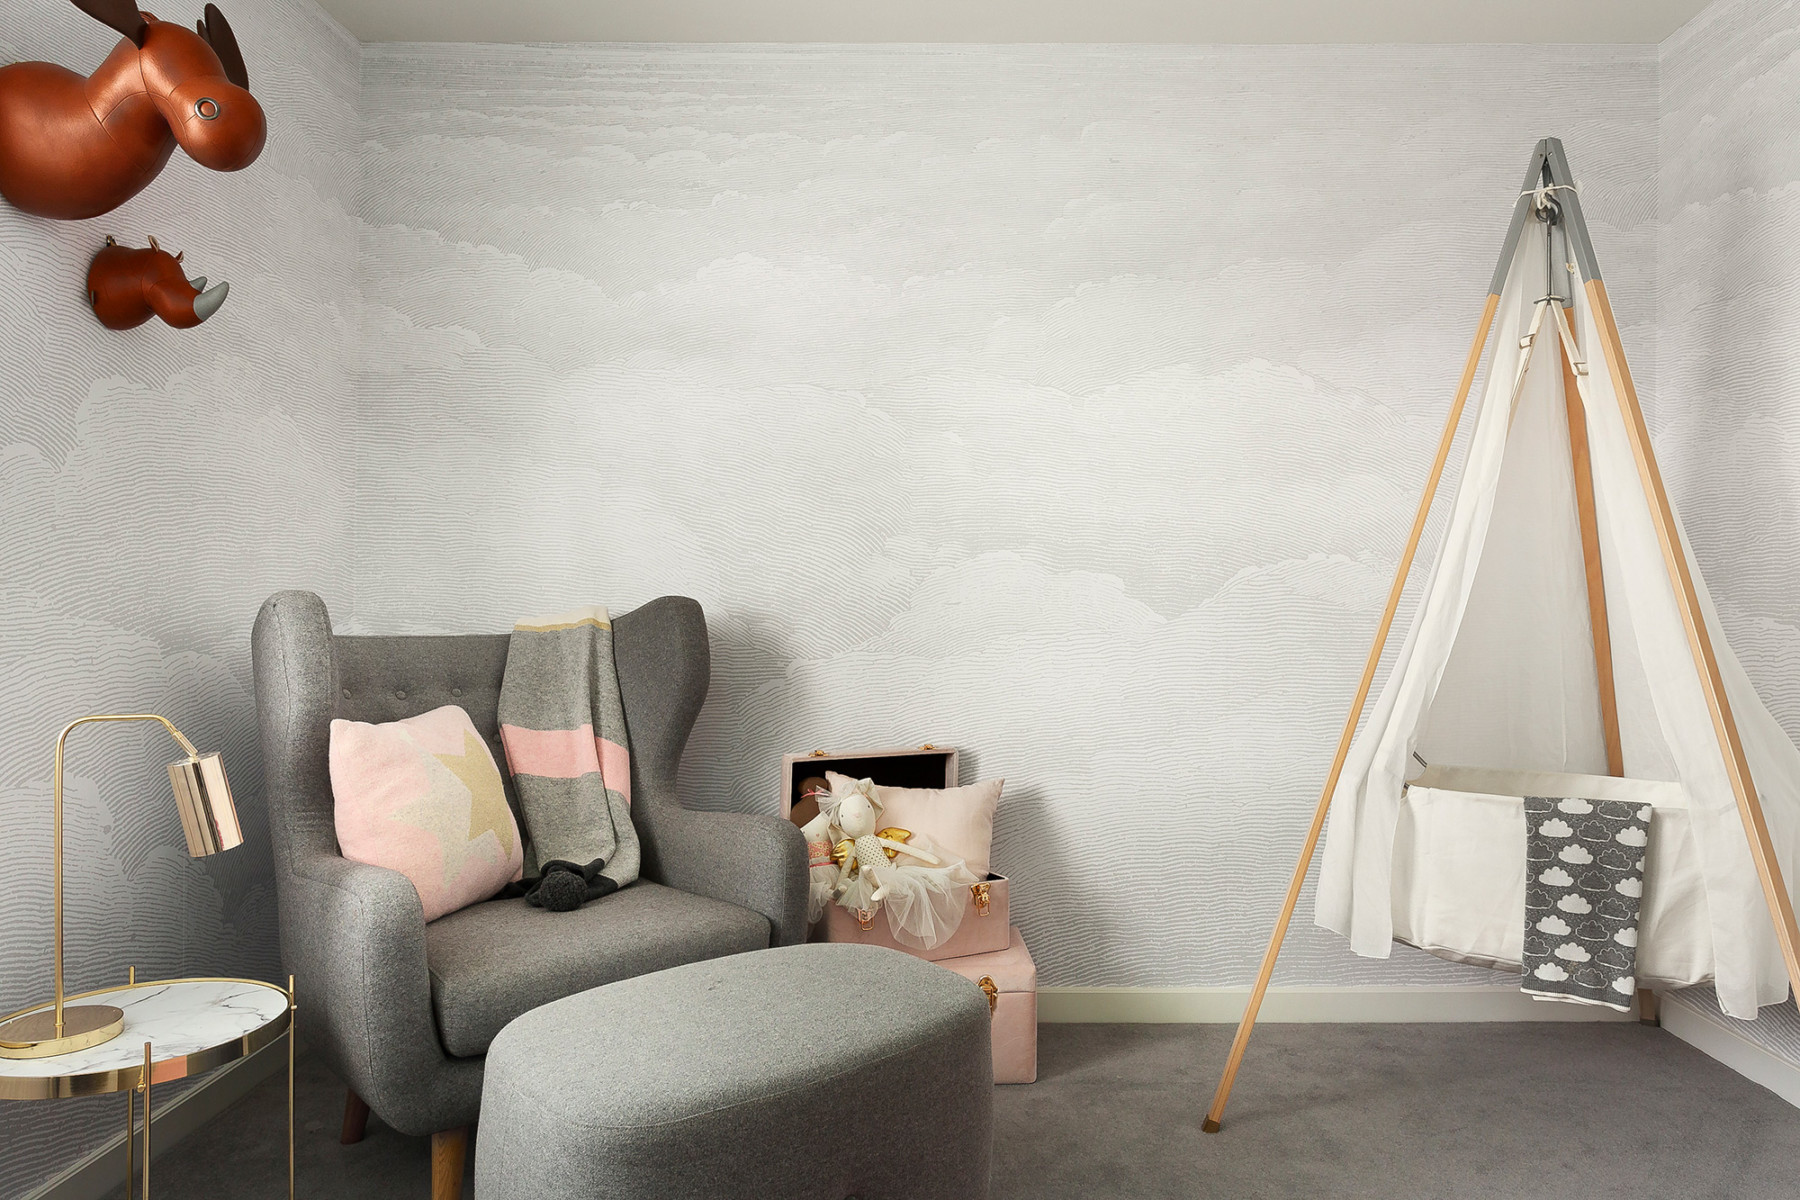 Etched Clouds - Cool Grey Wallpaper | Grafico Melbourne